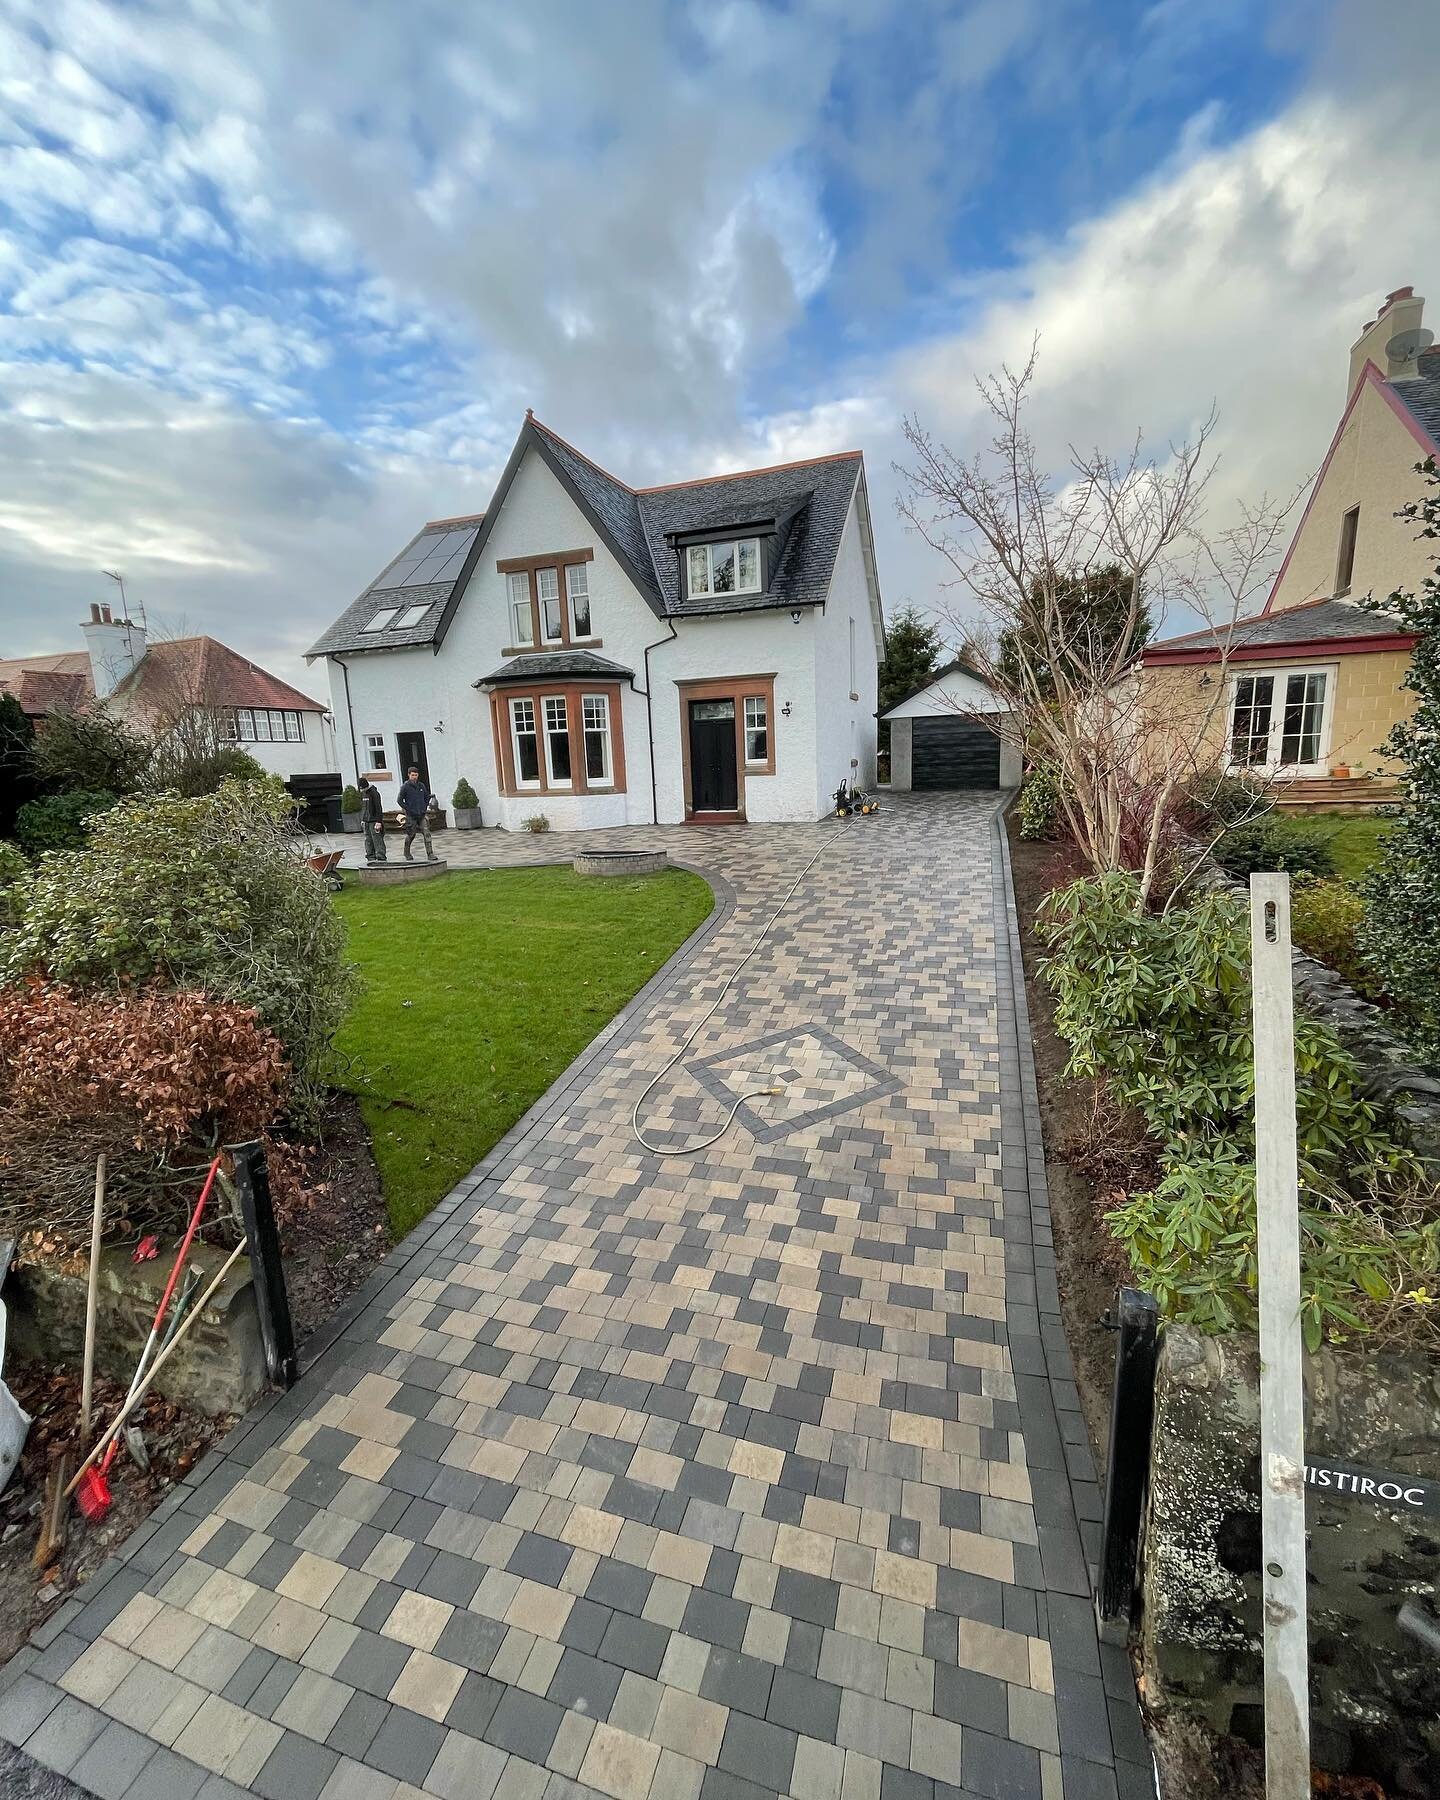 A job we finished at the tail end of 2021 changing the shape and totally renewing a drive way, a raised patio in the back garden and completely re turfed.

Get in touch for a free quote